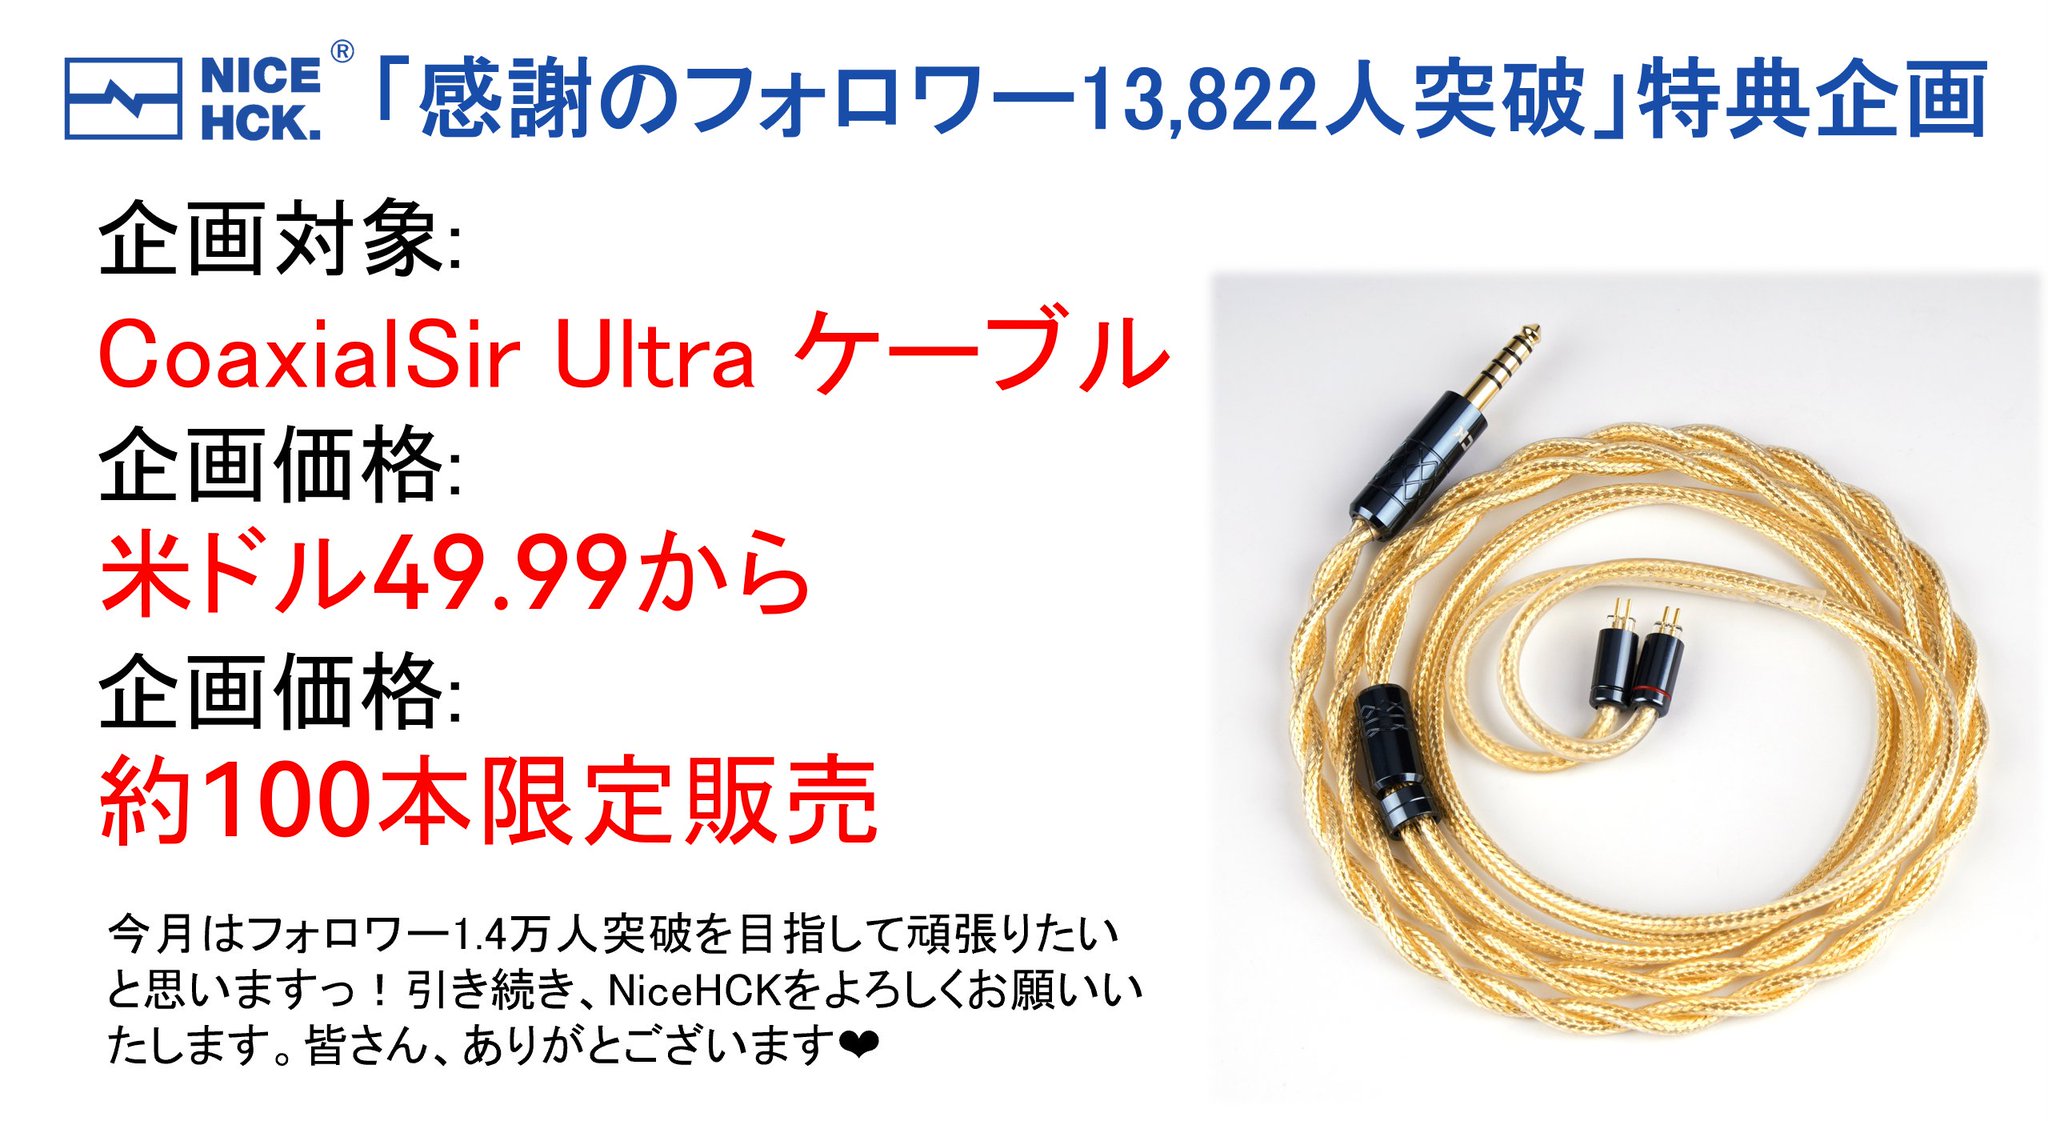 NiceHCK CoaxialSir UltraとFirstTouch